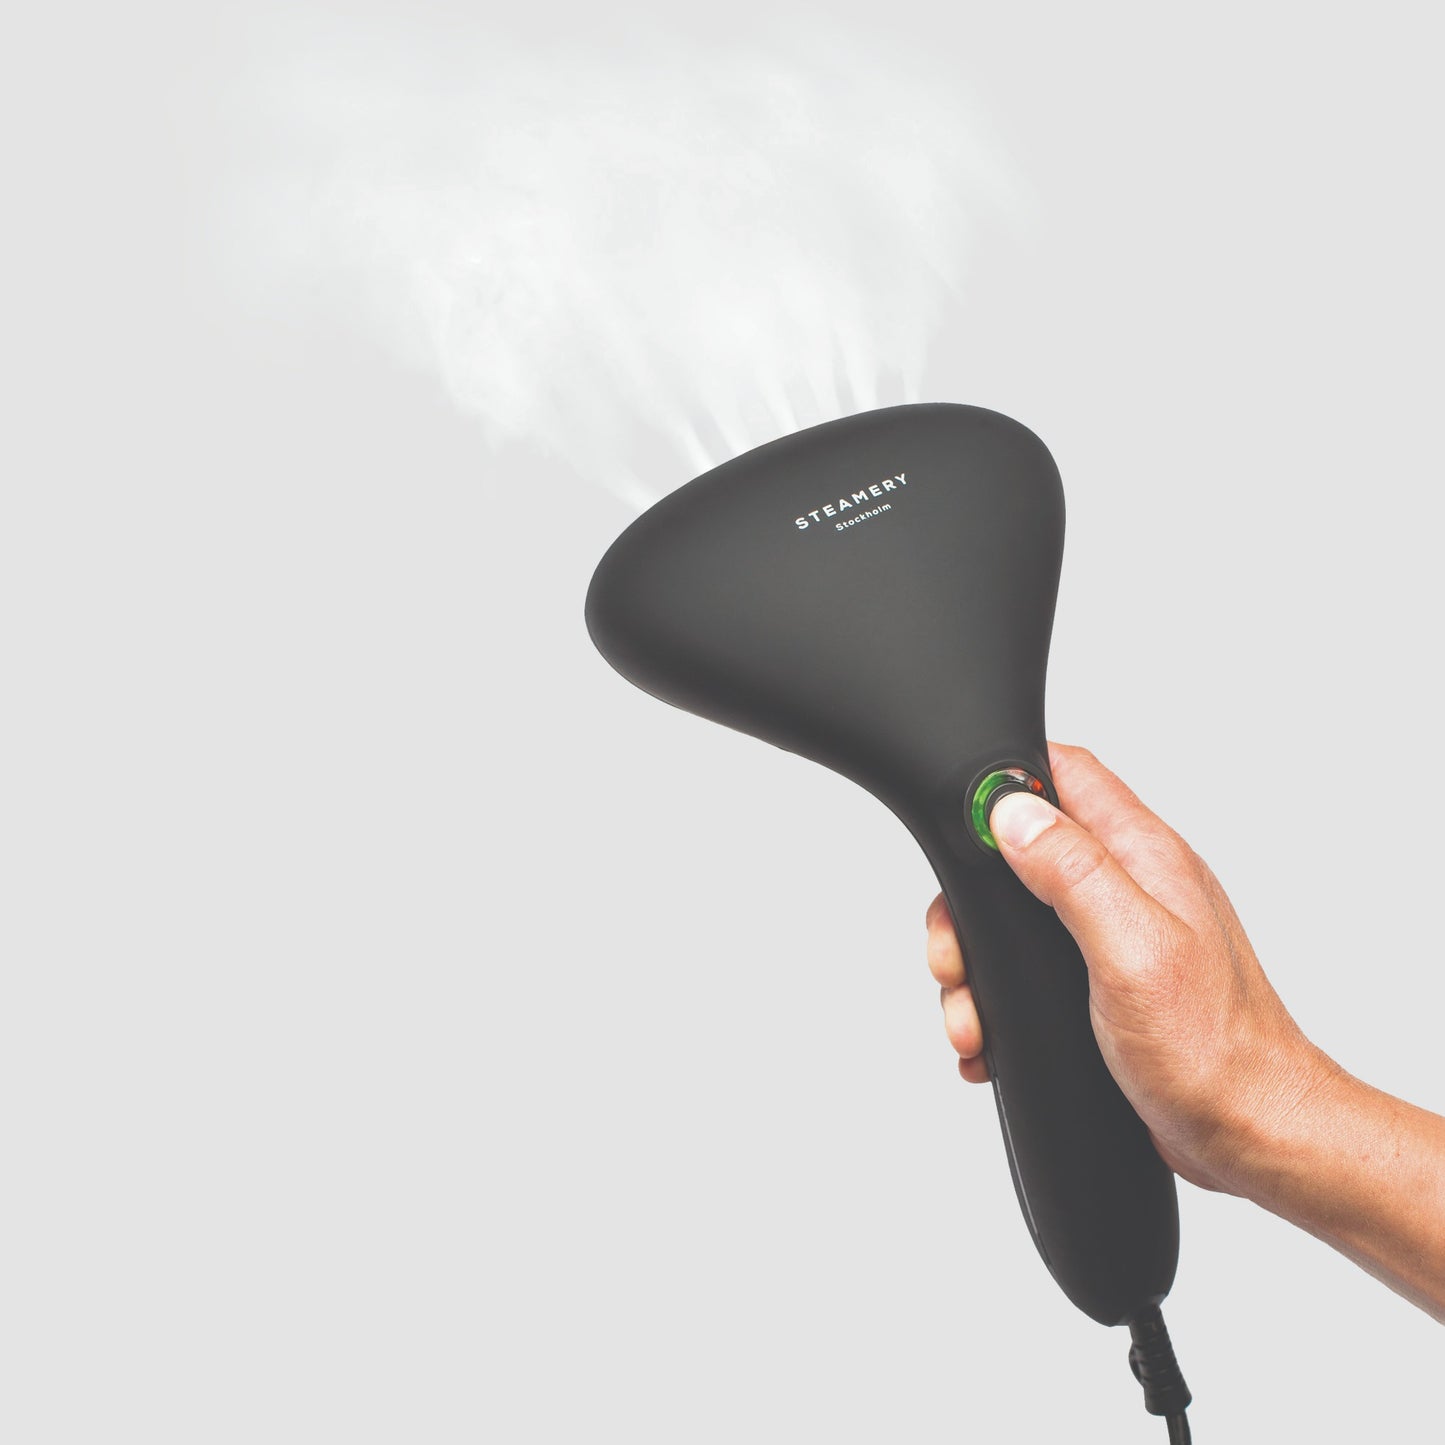 The hot steam from a handheld steamer lifts the textile fibers – instead of pressing them down like the iron – and makes them swell and regain their natural shape. 